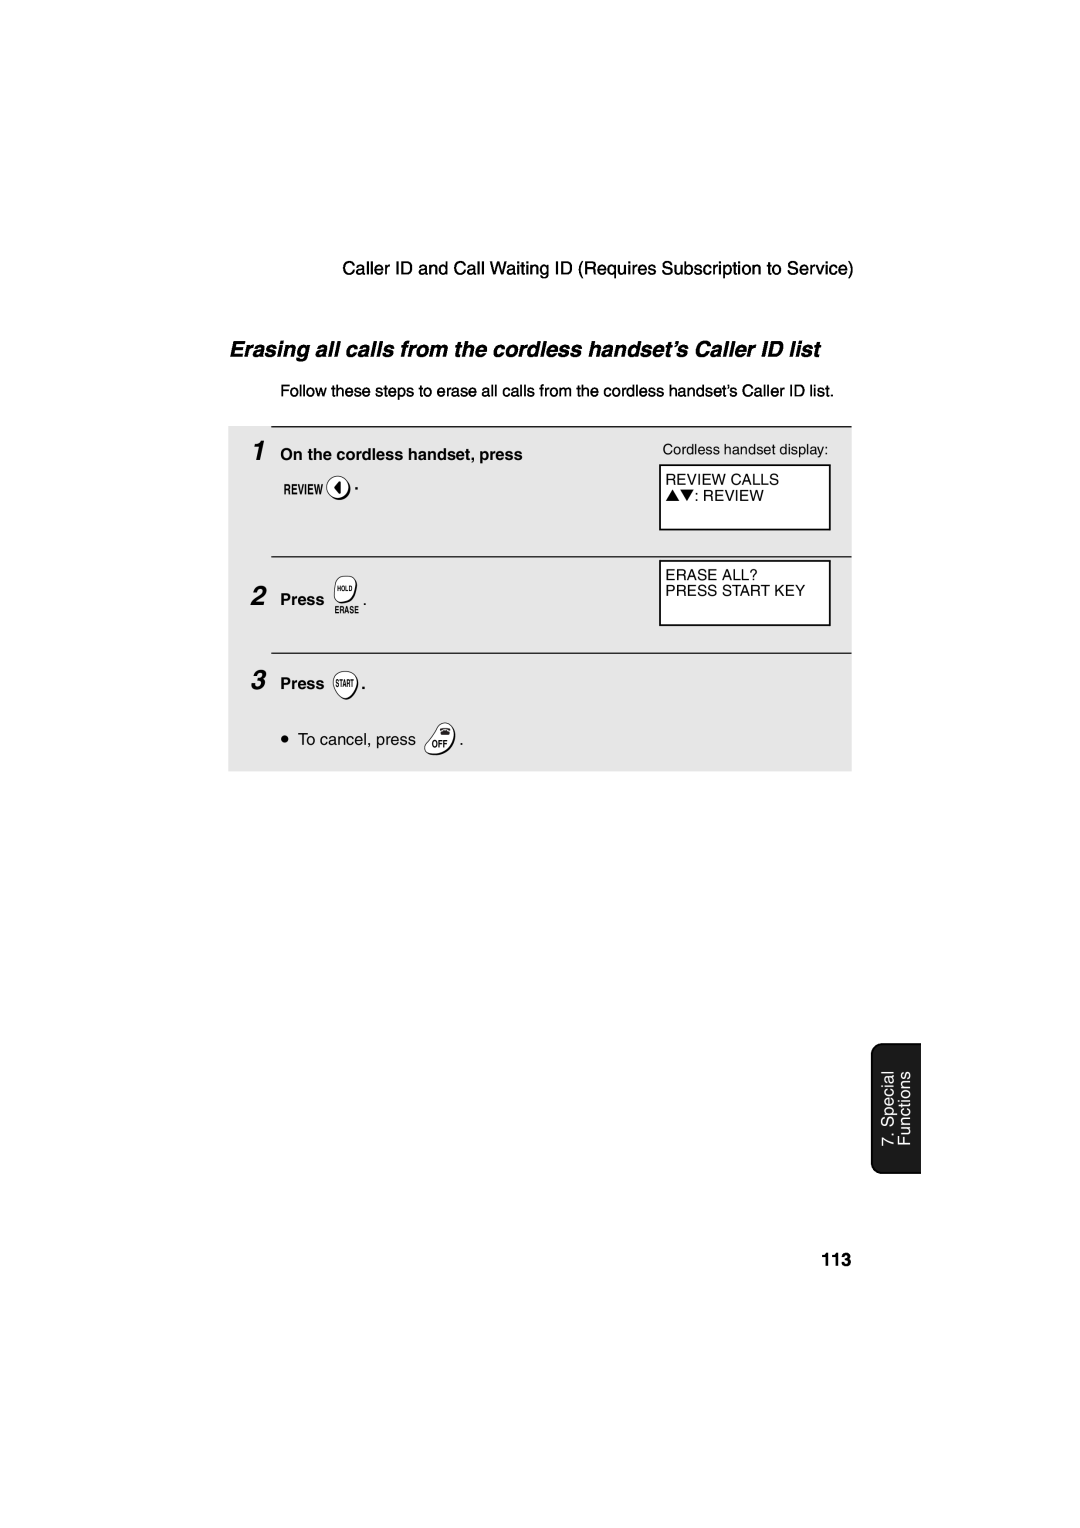 Sharp UX-CD600 Erasing all calls from the cordless handset’s Caller ID list, Special Functions, Cordless handset display 